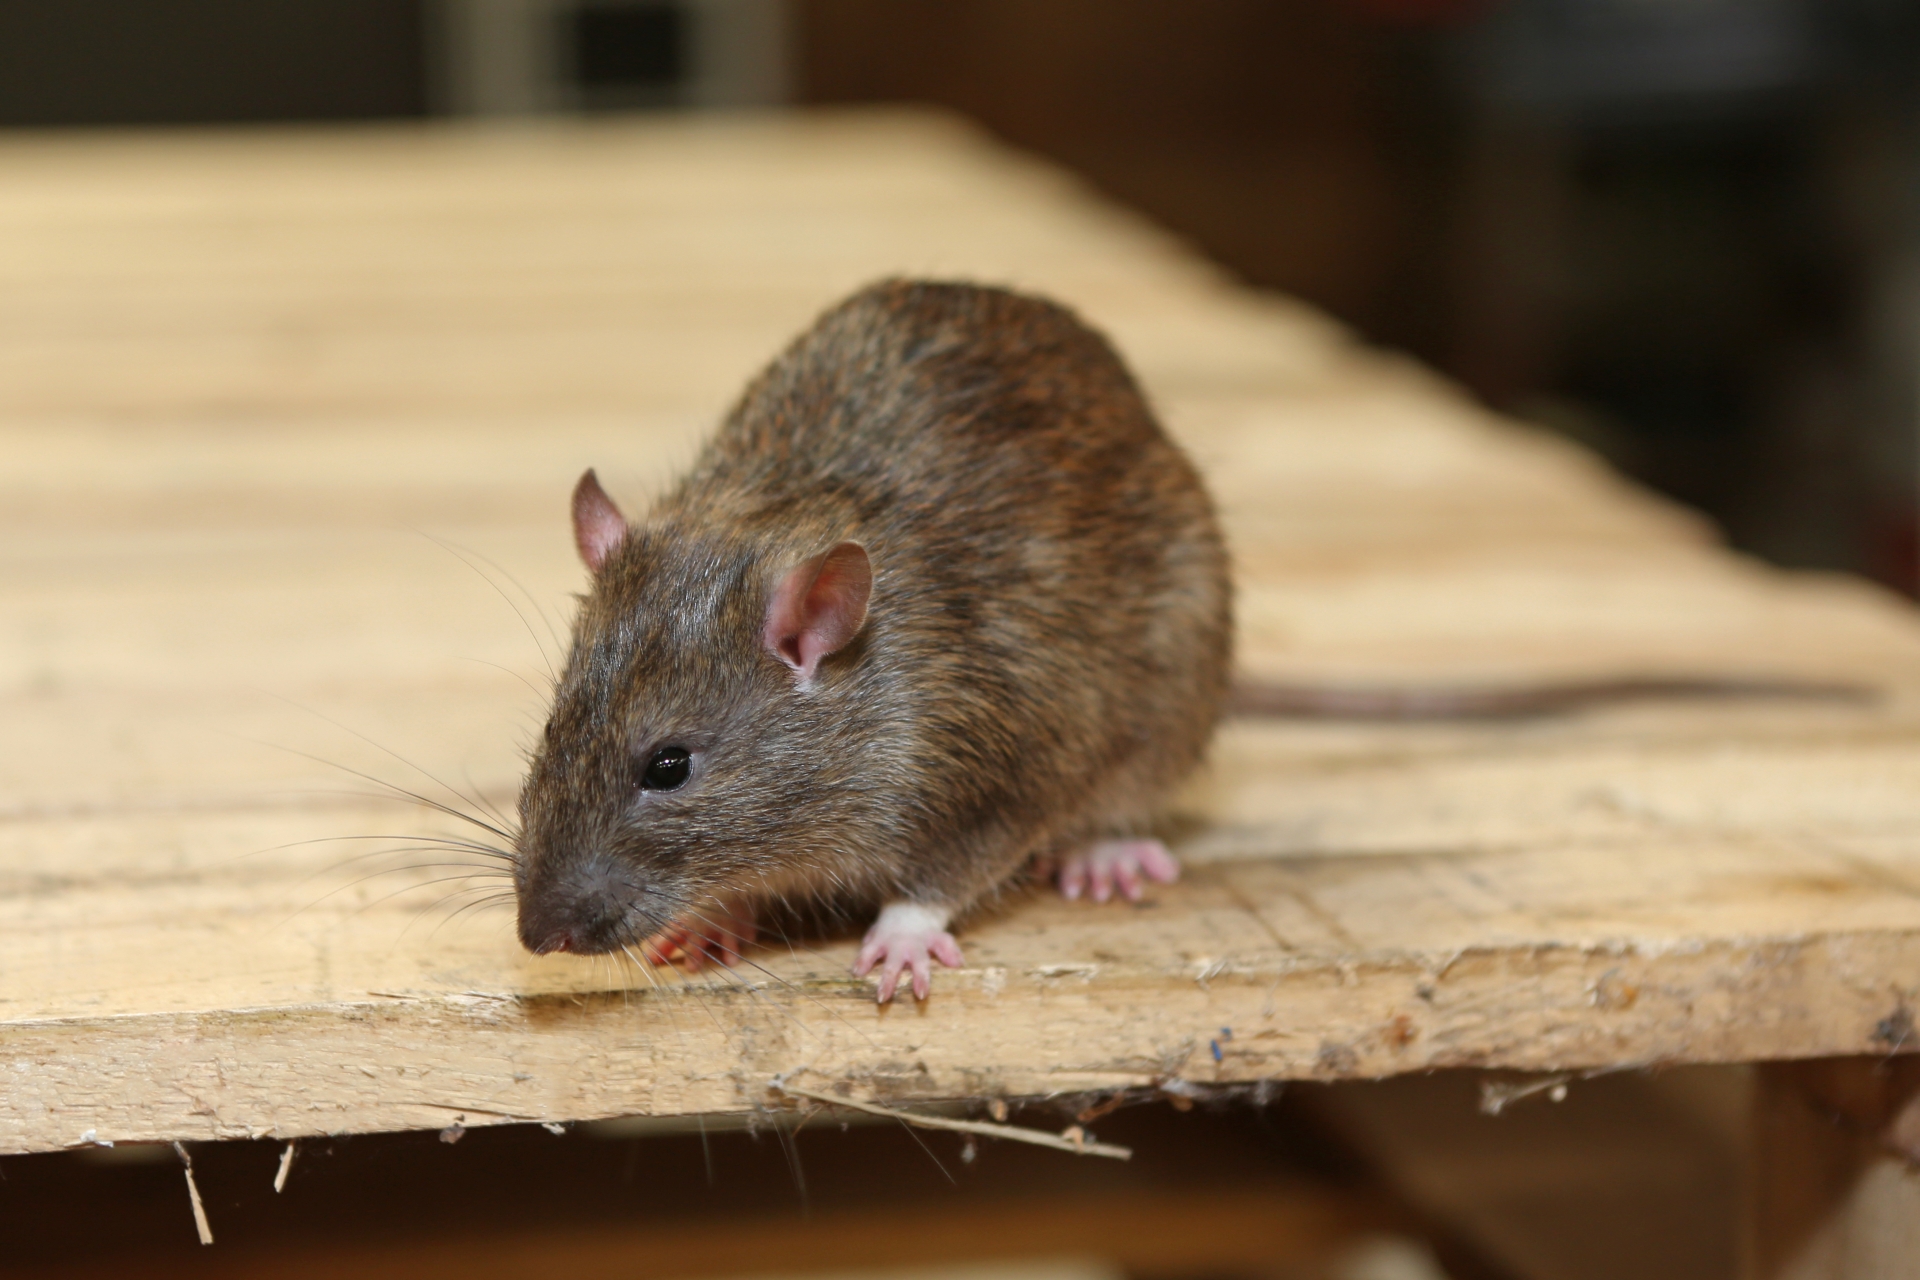 Rat Infestation, Pest Control in Hounslow, Lampton, TW3. Call Now 020 8166 9746